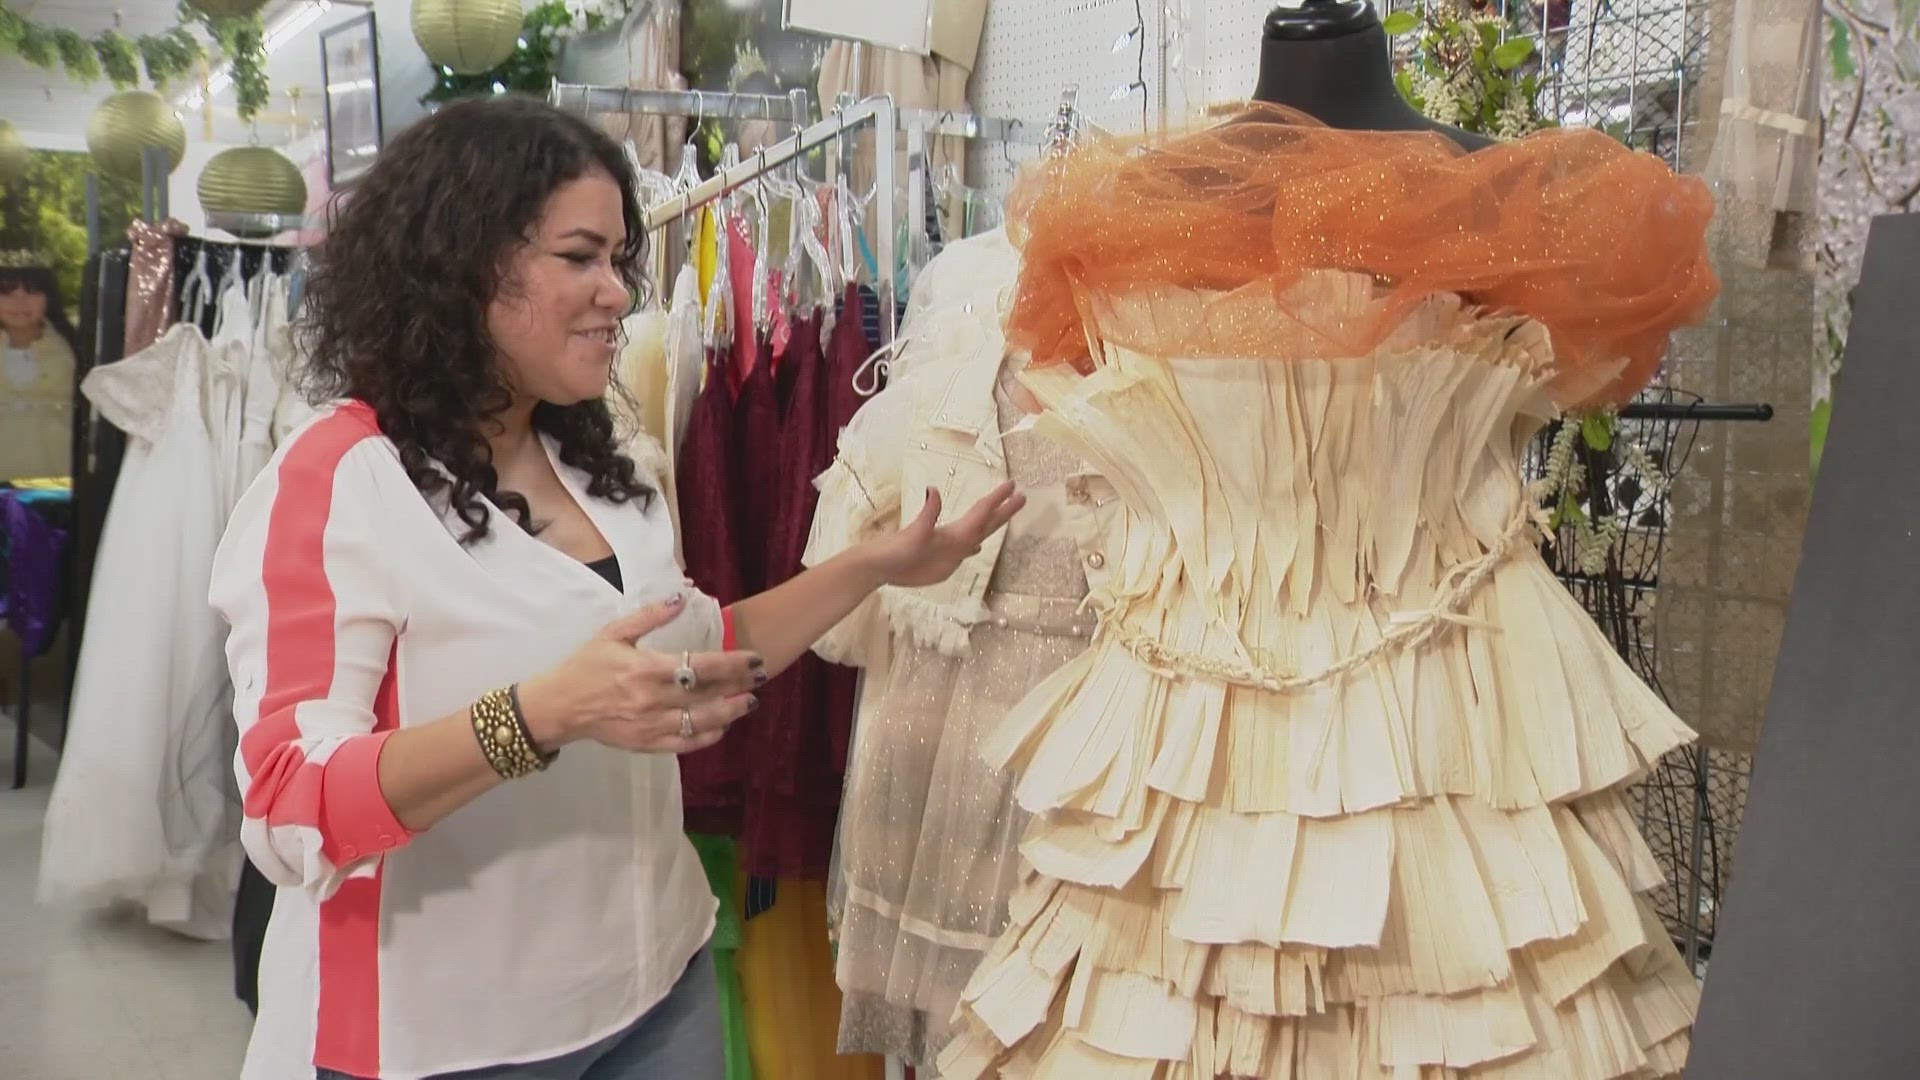 it's likely that local fashion designer Sandy Royce is the first to "cook up" the tamal dress.